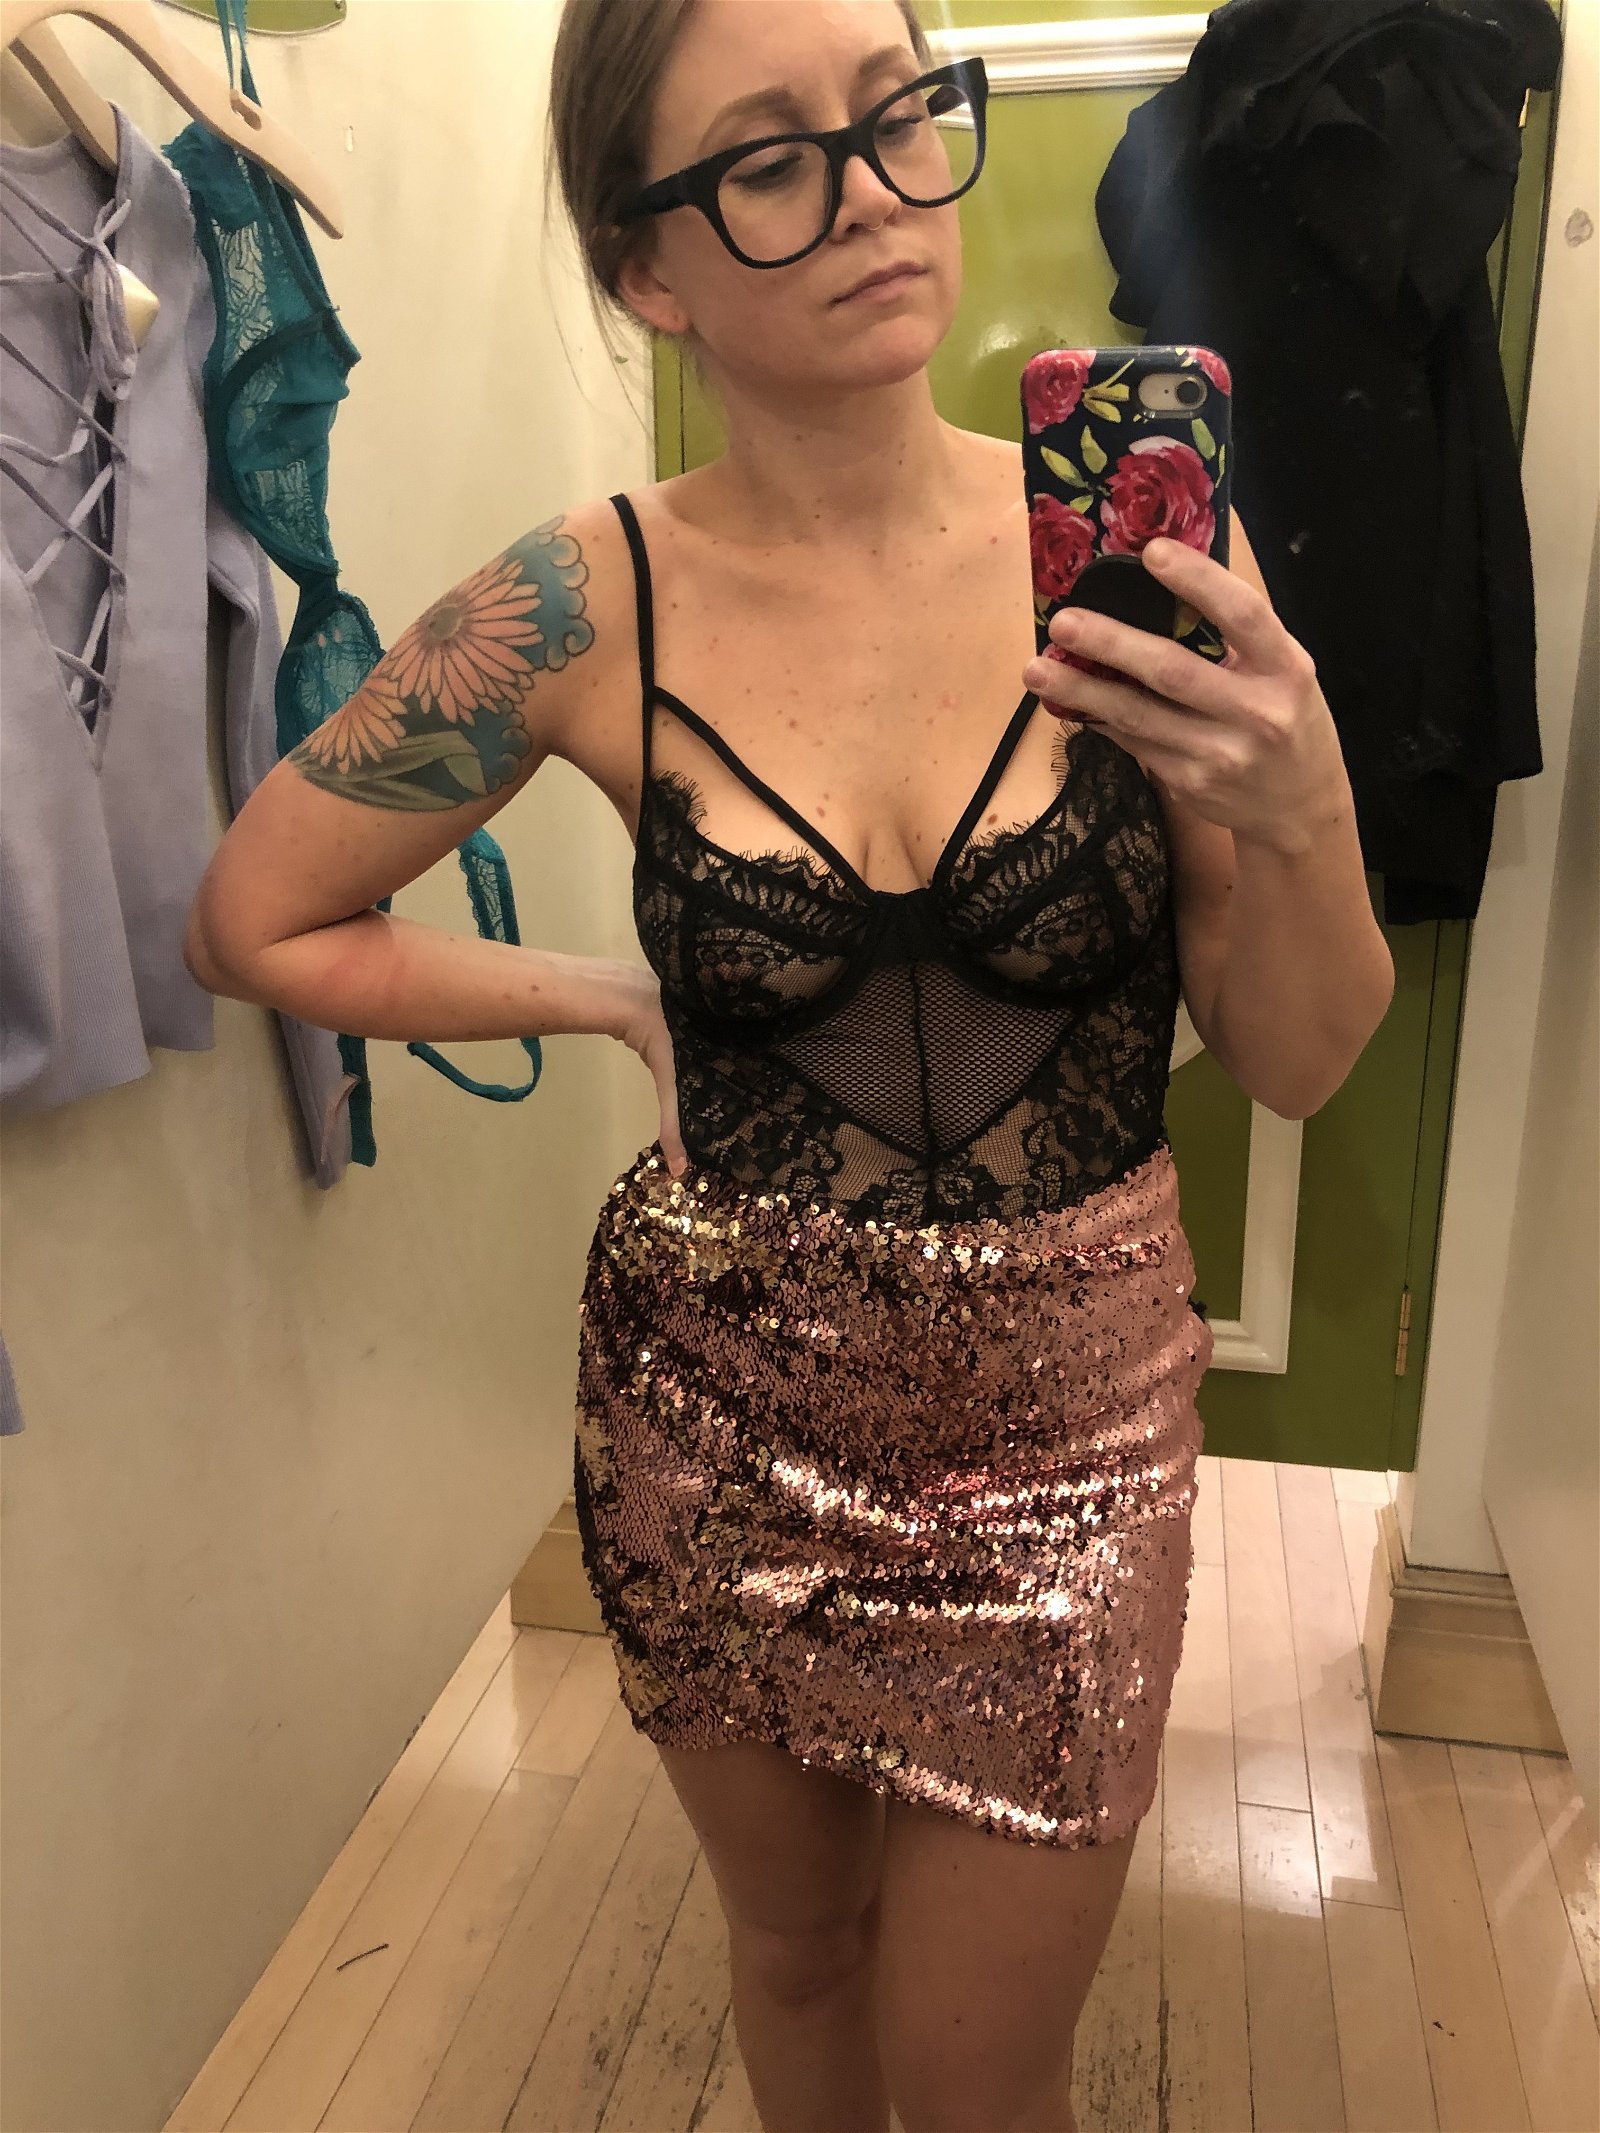 Photo by Cora Lane with the username @Coralaane, who is a verified user,  March 11, 2020 at 5:33 PM. The post is about the topic Hotwife and the text says 'Shopping for soemthing to wear to the sex club. What would you guys want to see me in?'